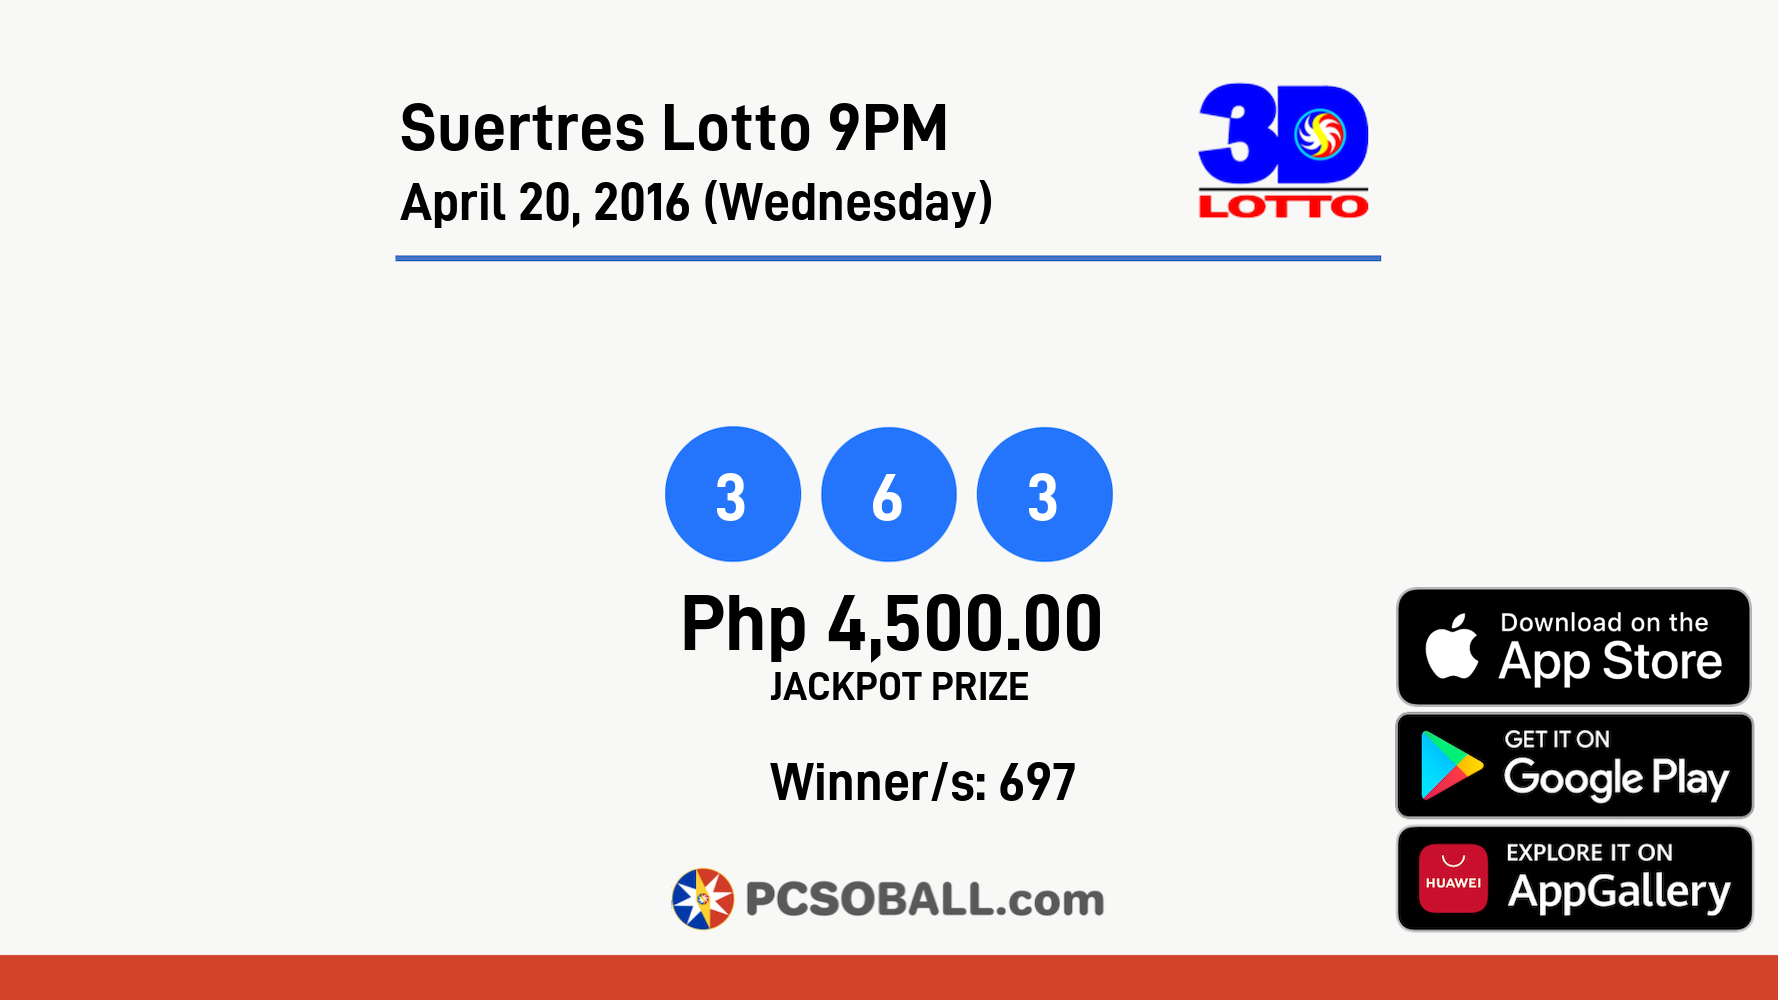 Suertres Lotto 9PM April 20, 2016 (Wednesday) Result